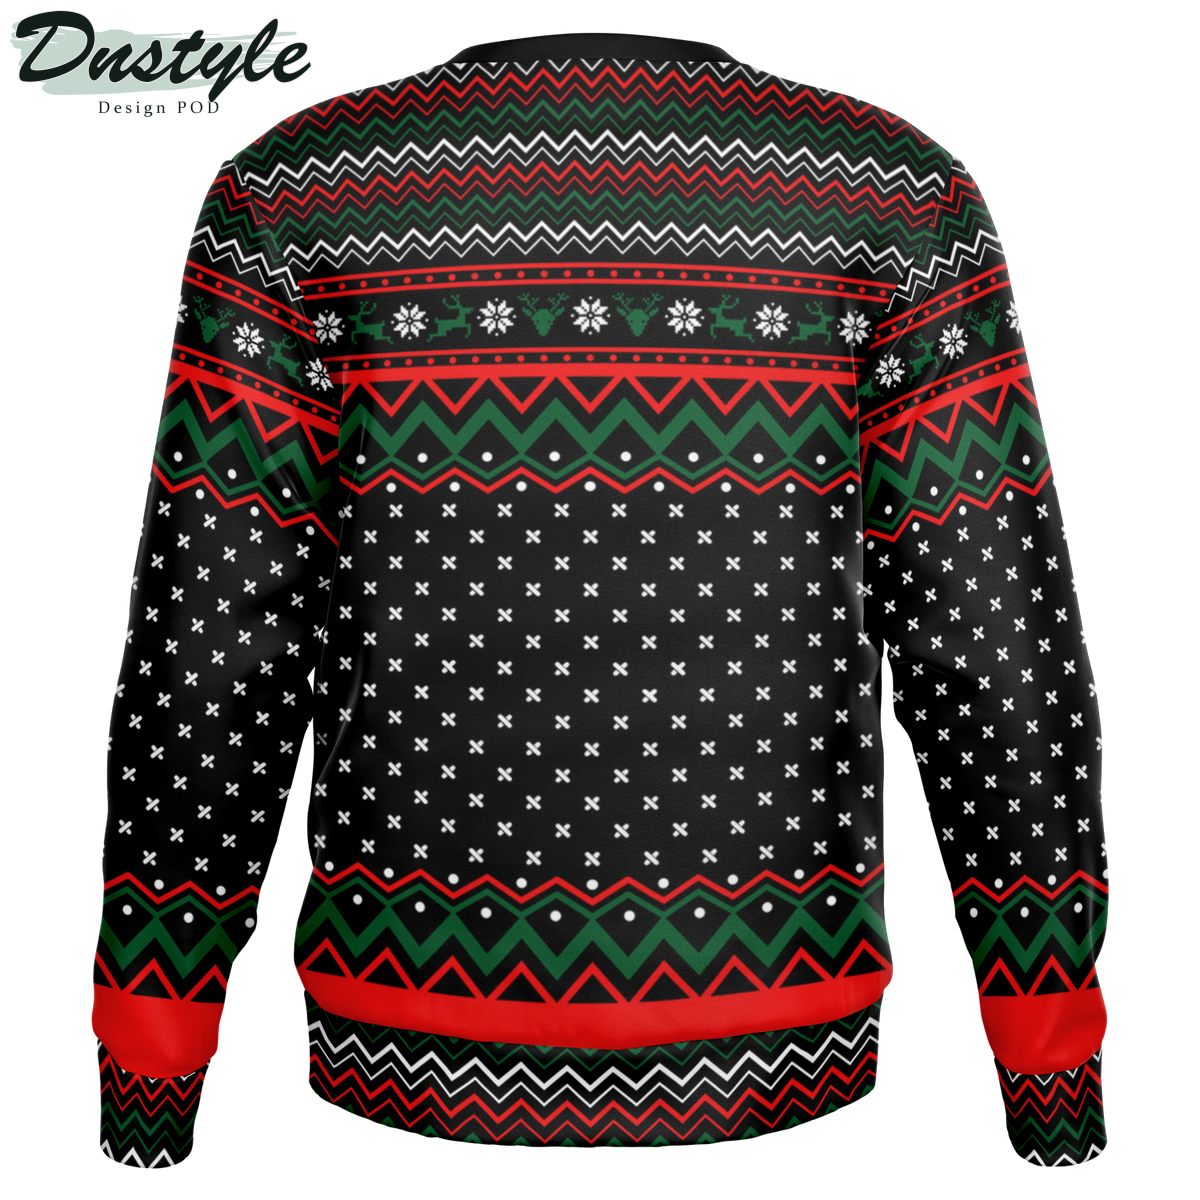 All Year Long Delivery Ugly Christmas Sweater